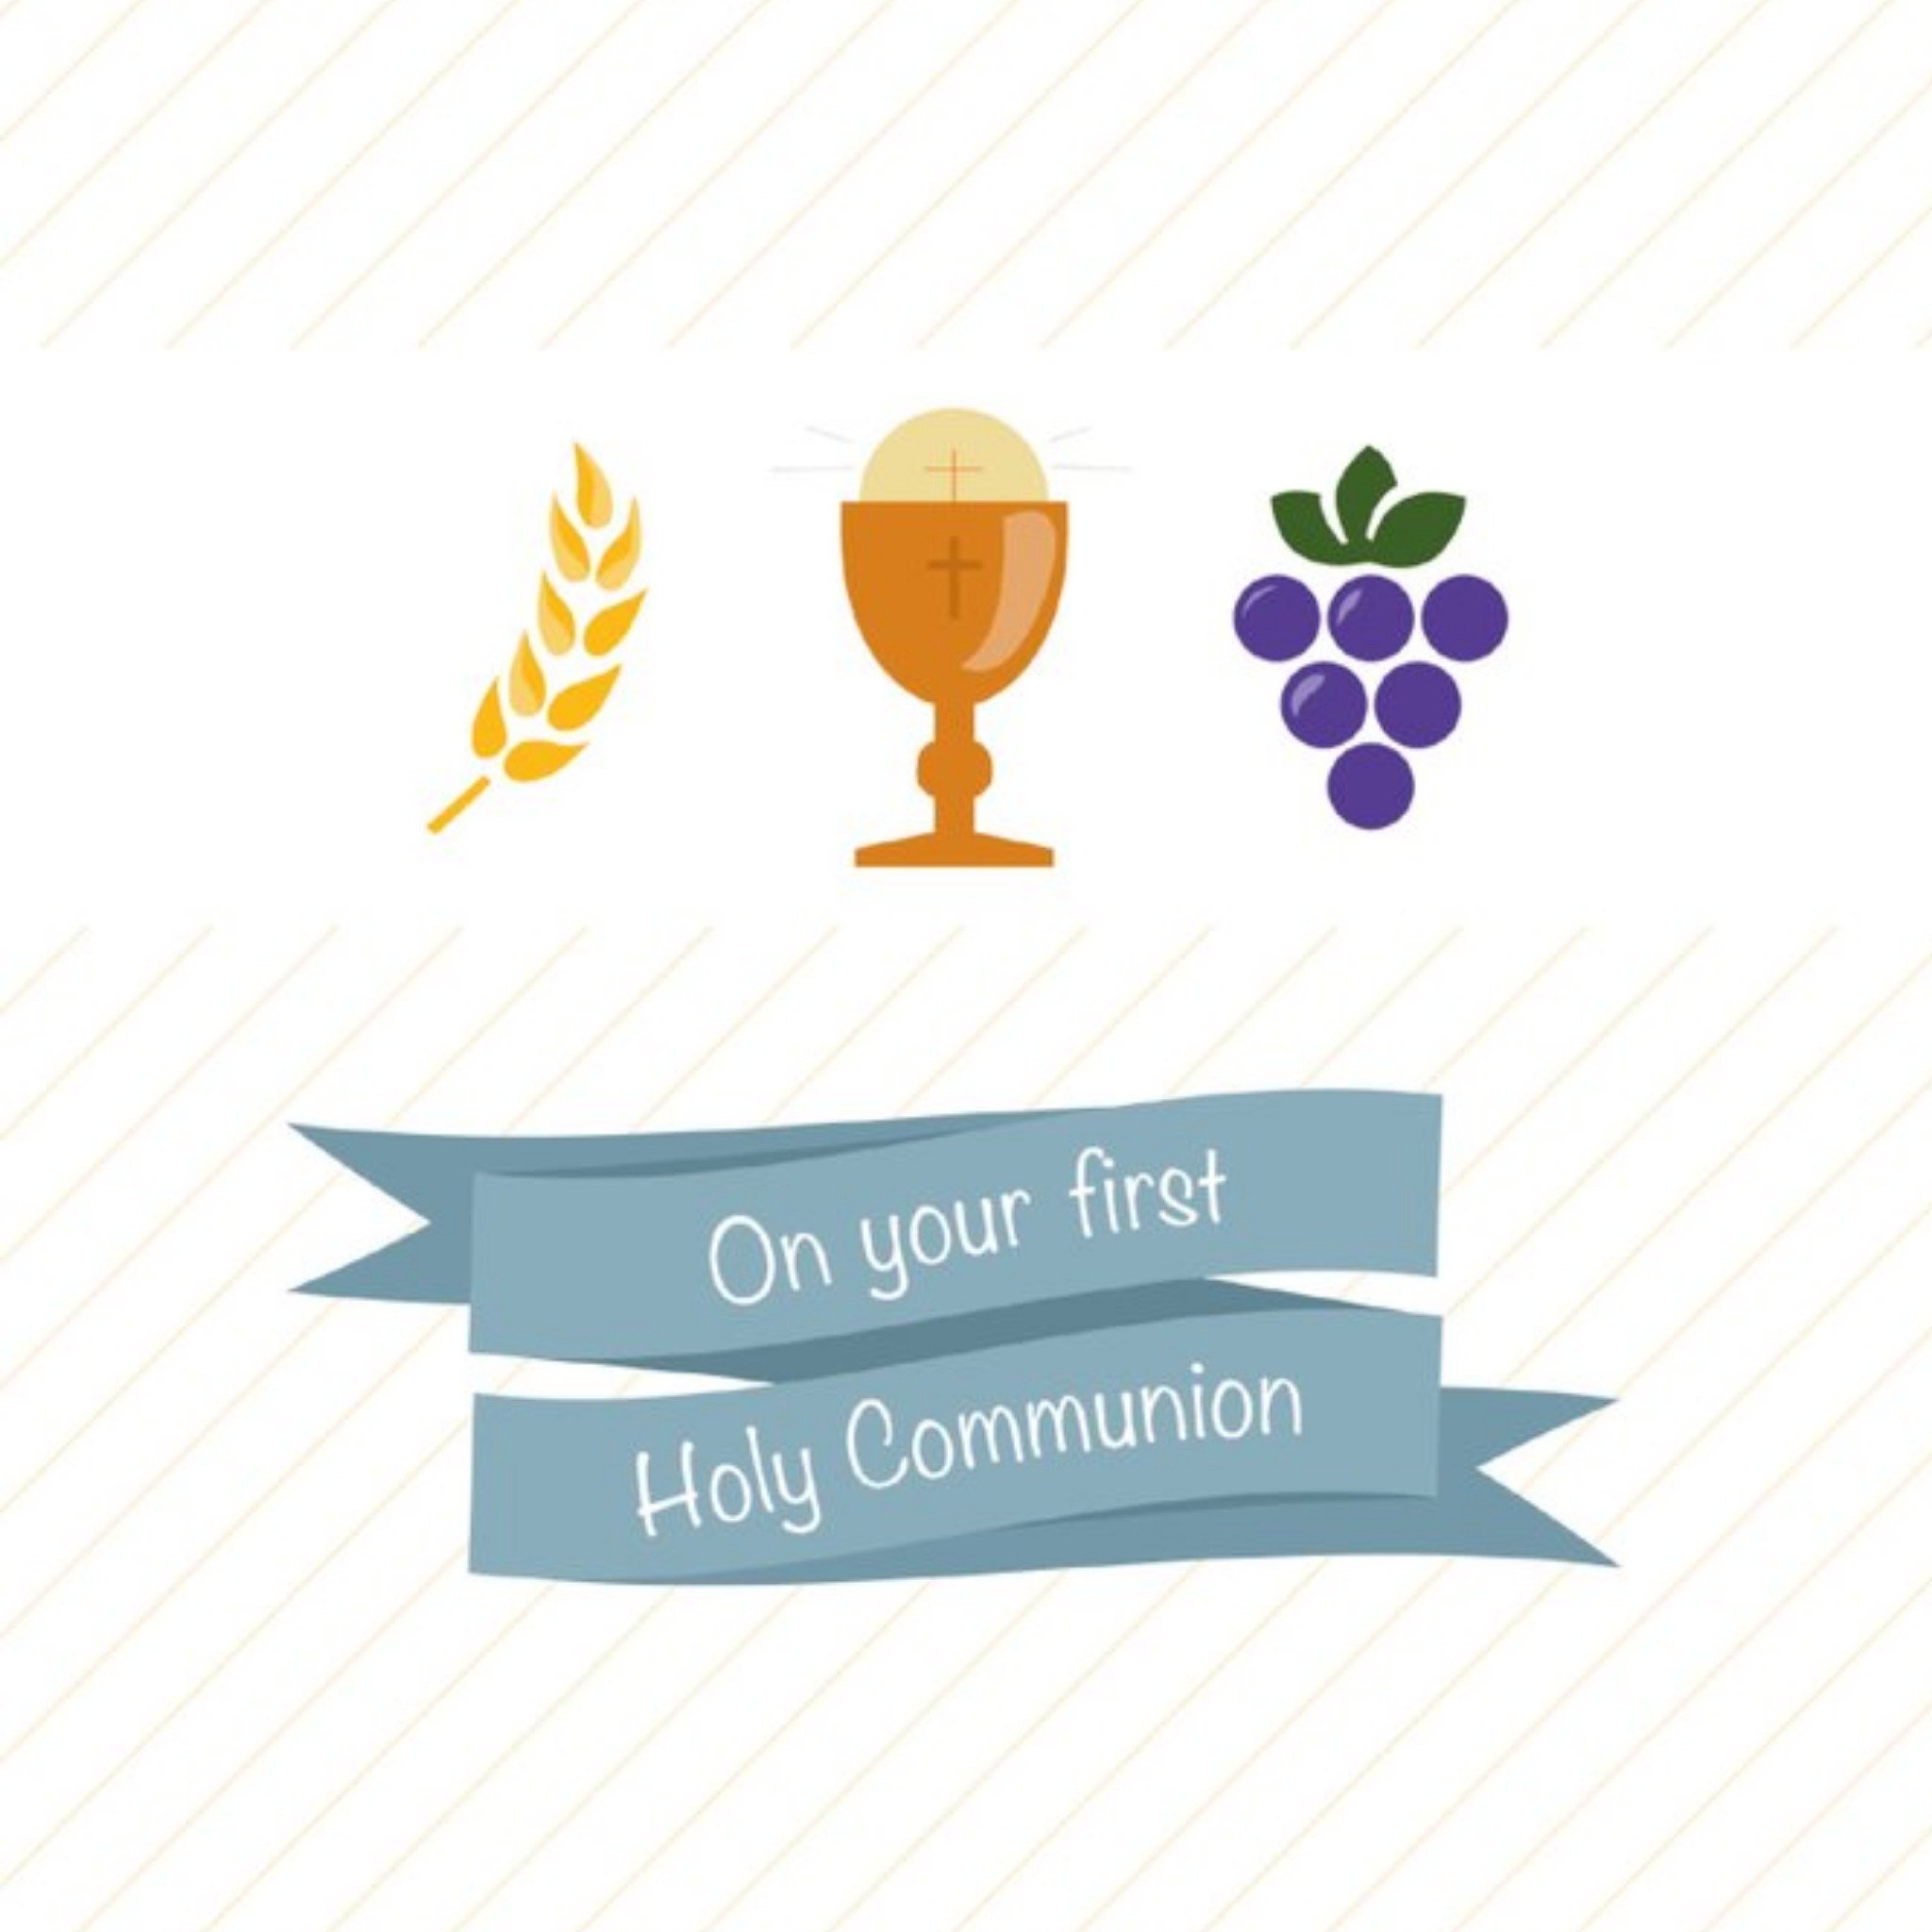 Moonpig On Your Holy Communion Wheat Goblet Grape Card, Large